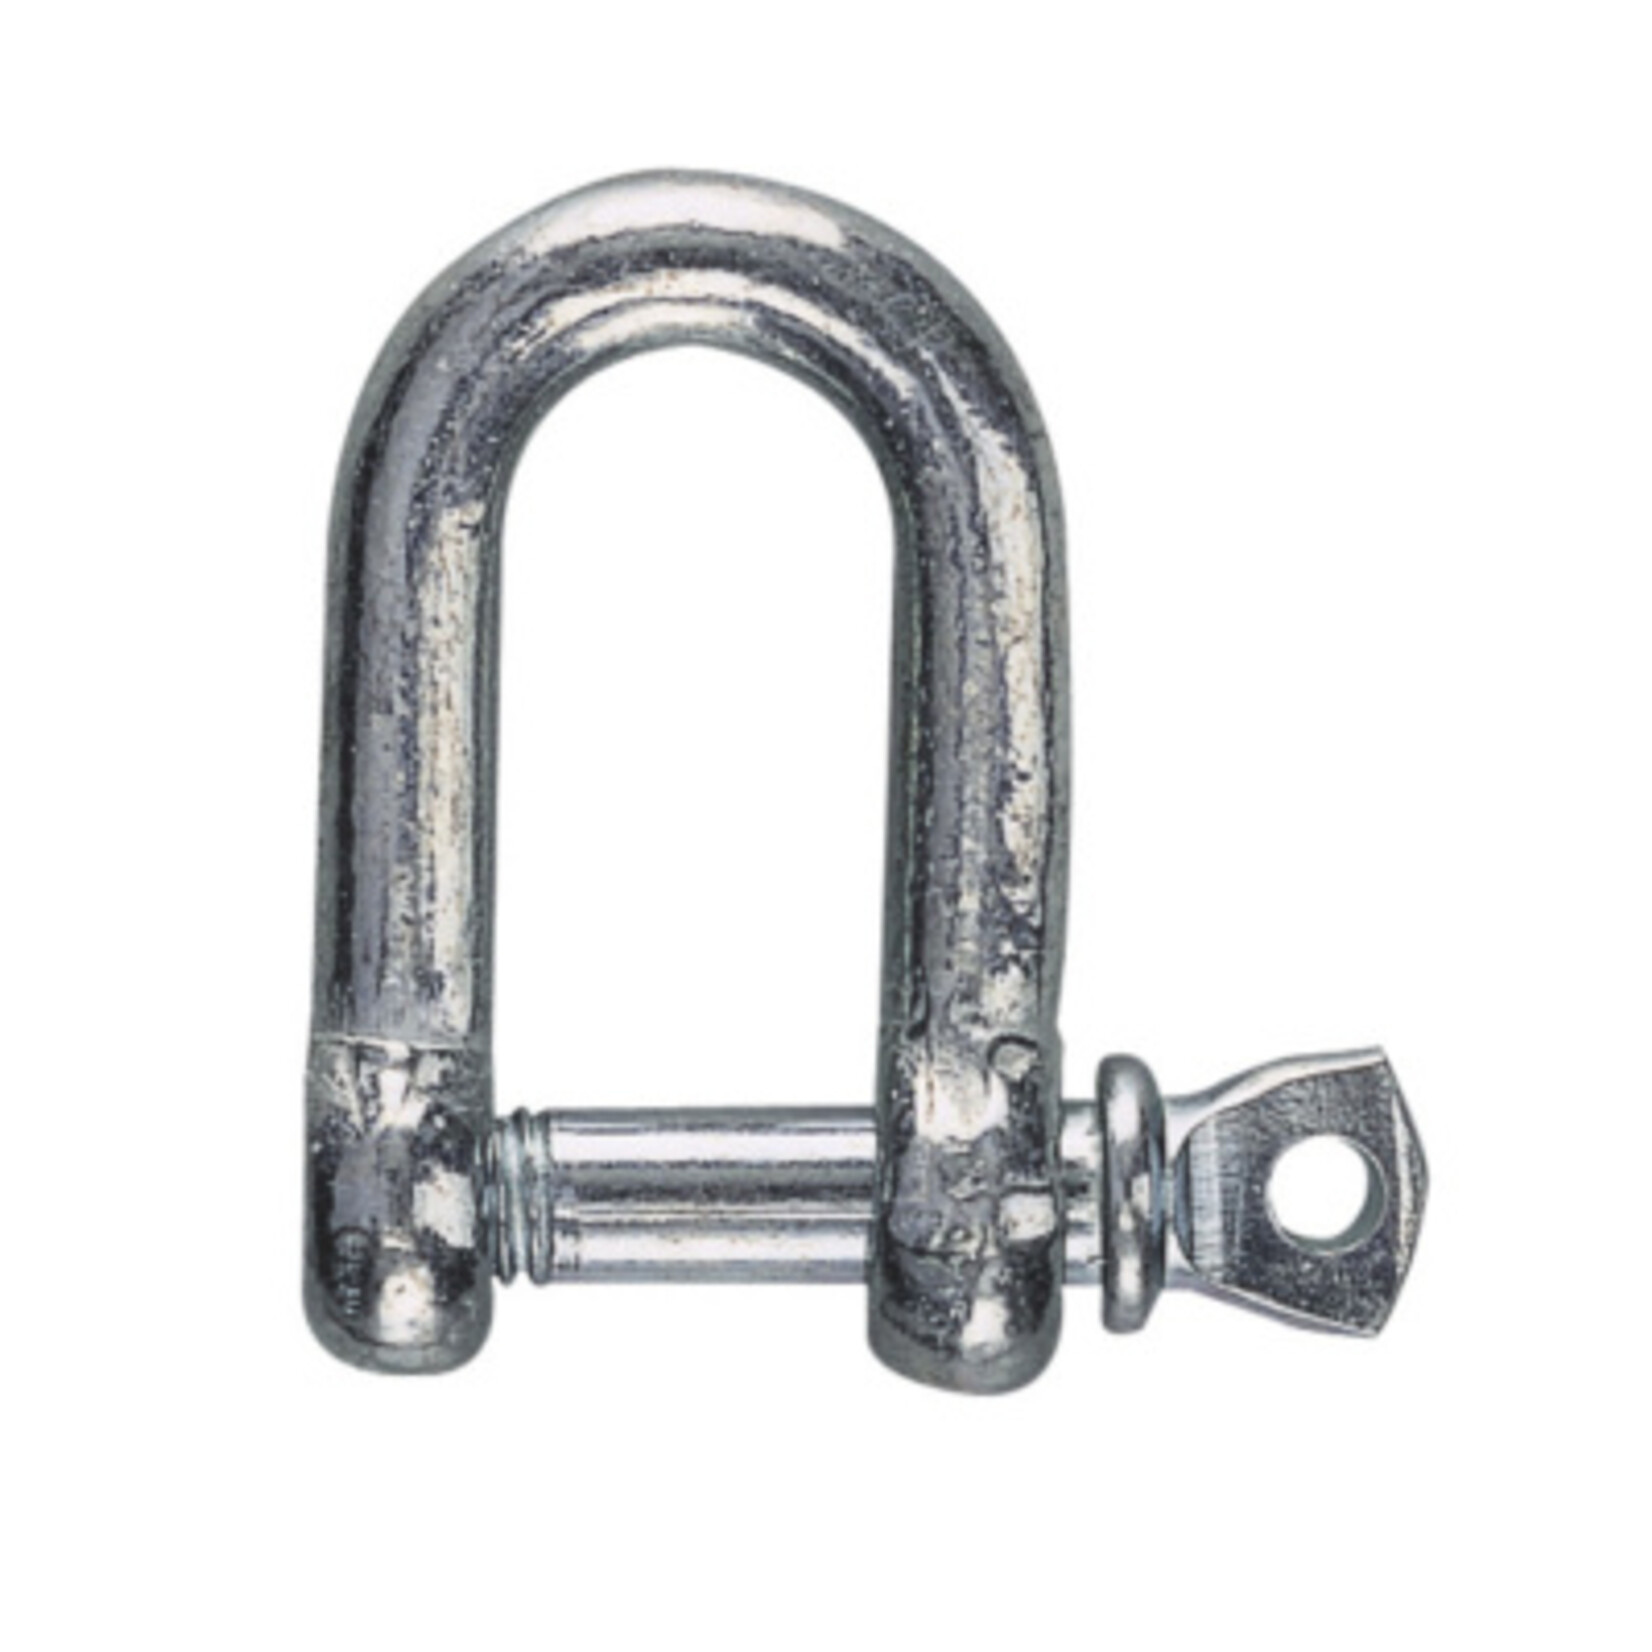 Plastimo Shackle gal d-shap dia 10mm yellow code